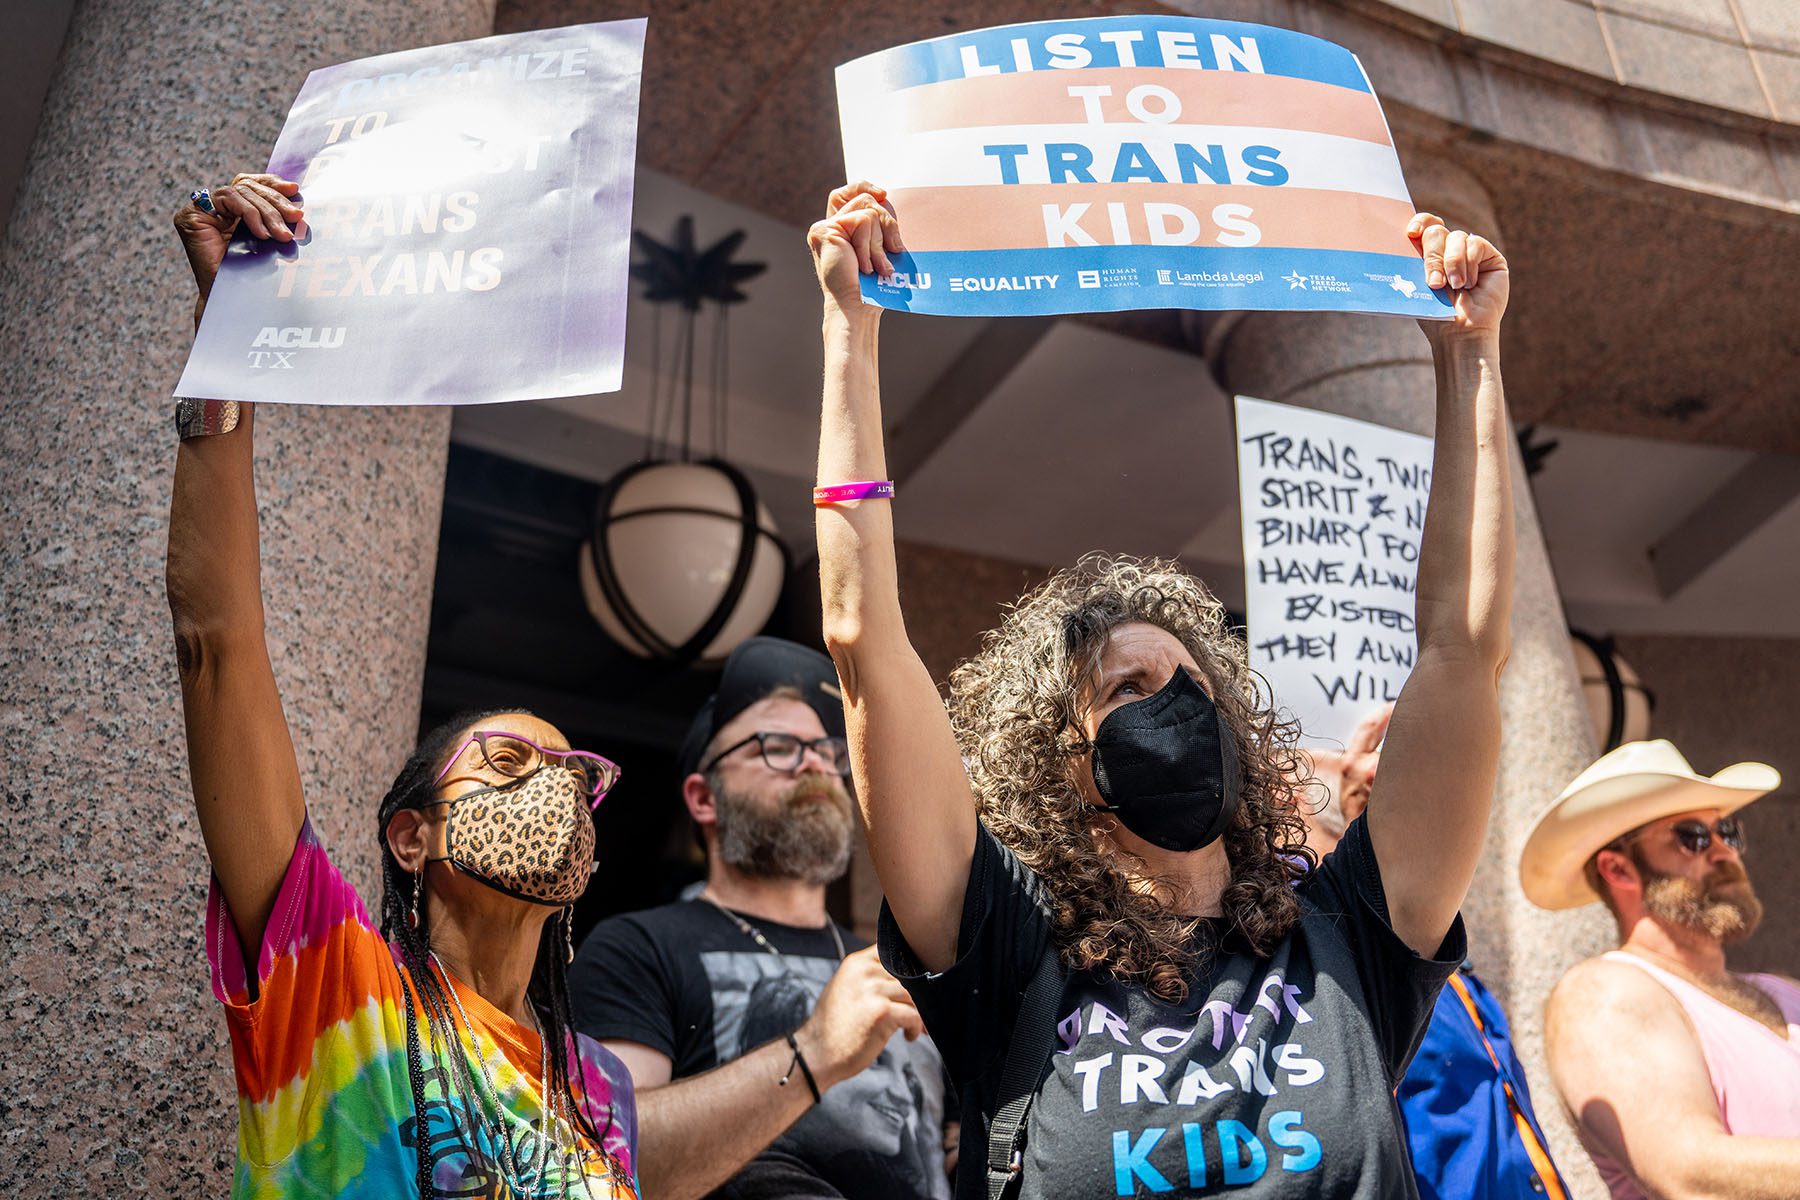 People protest bills HB 1686 and SB 14, which seek to limit healthcare to transgender youth, during a rally at the Texas State Capitol.